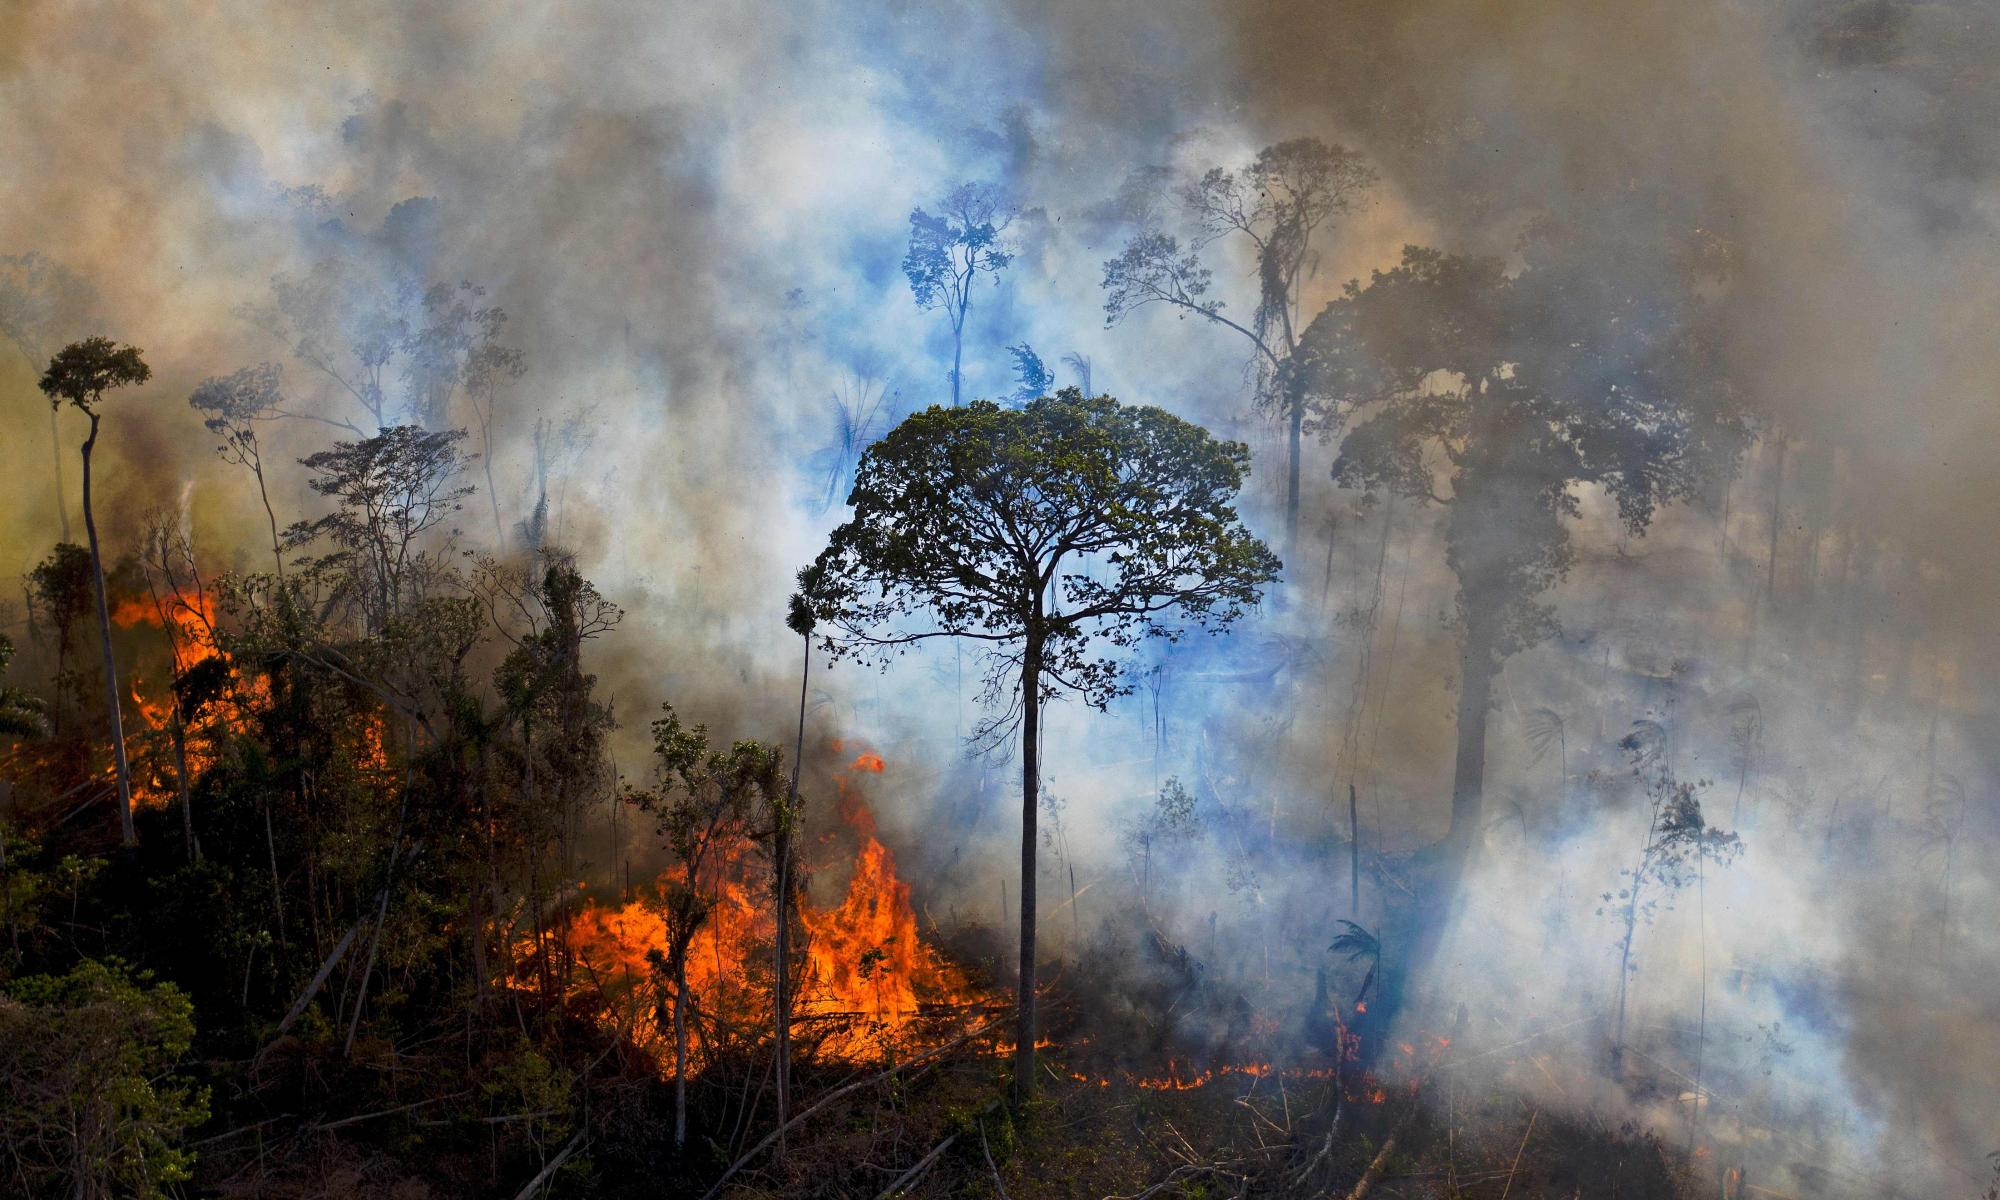 Large parts of Amazon may never recover, major study says